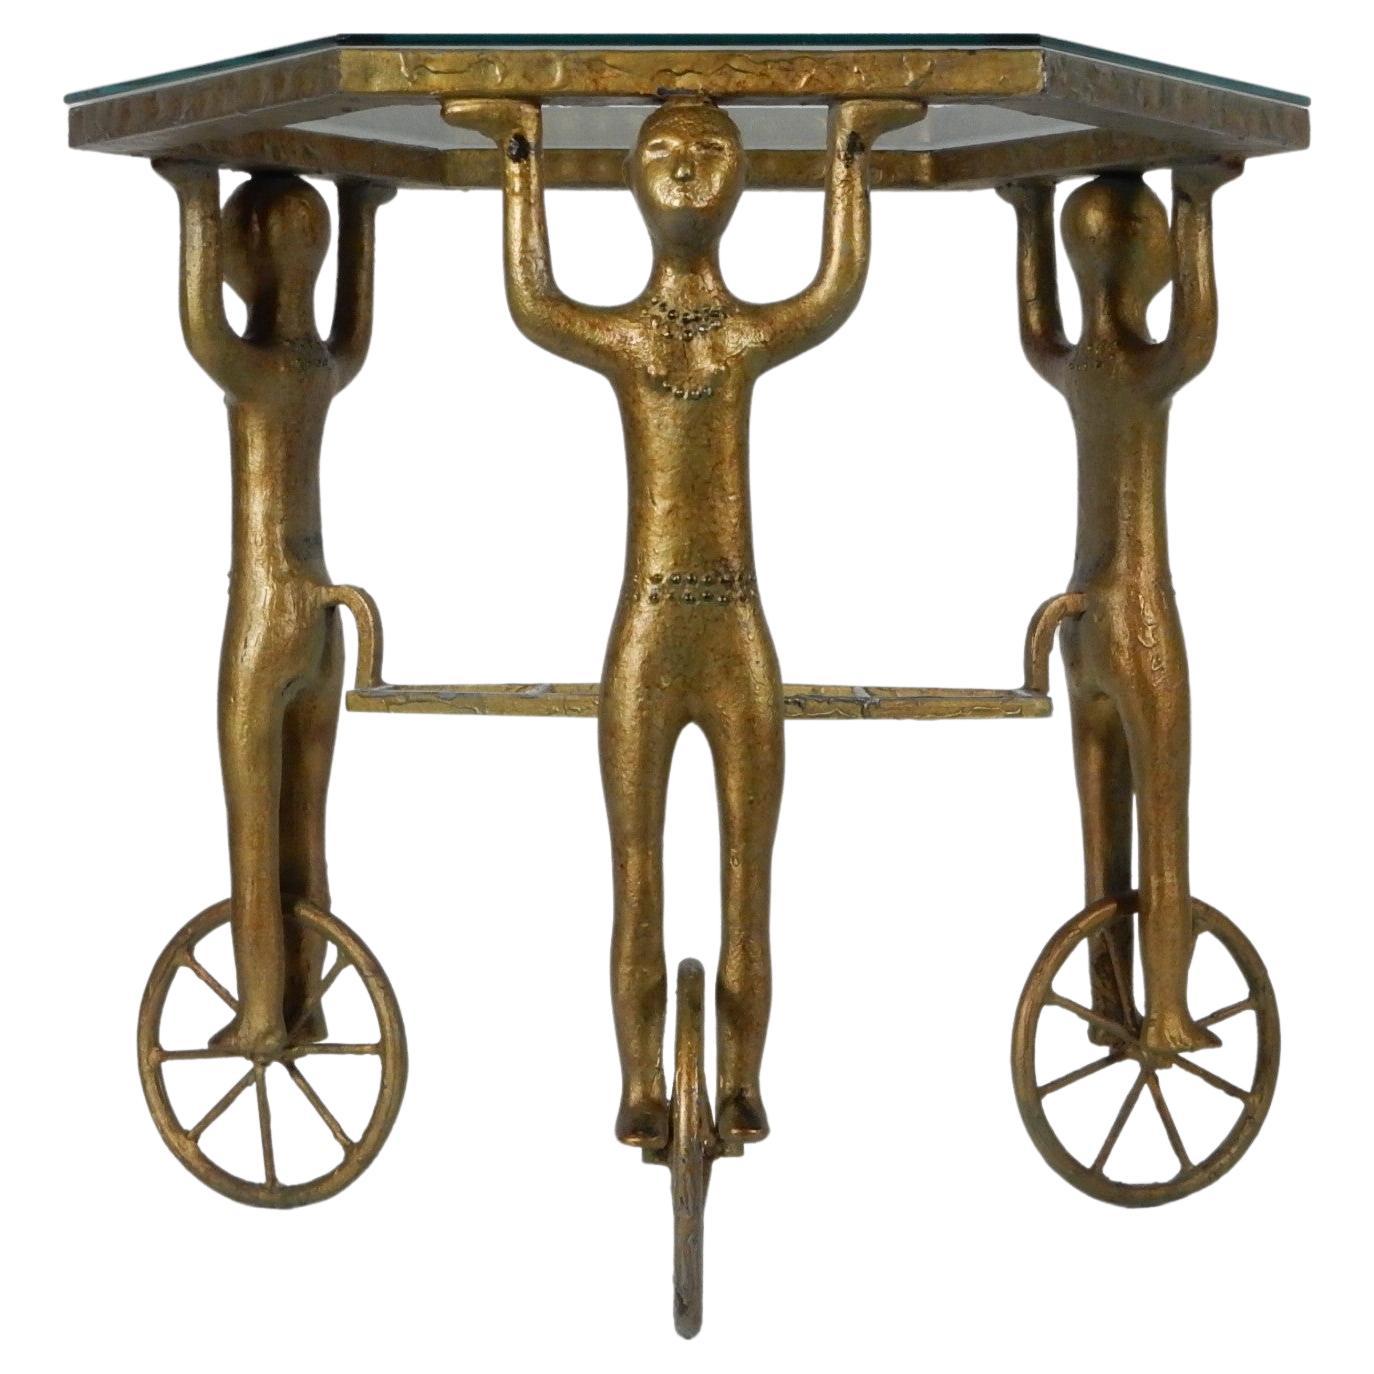 Androgynous Figural Cast Iron Gueridon Table after Alberto Giacometti